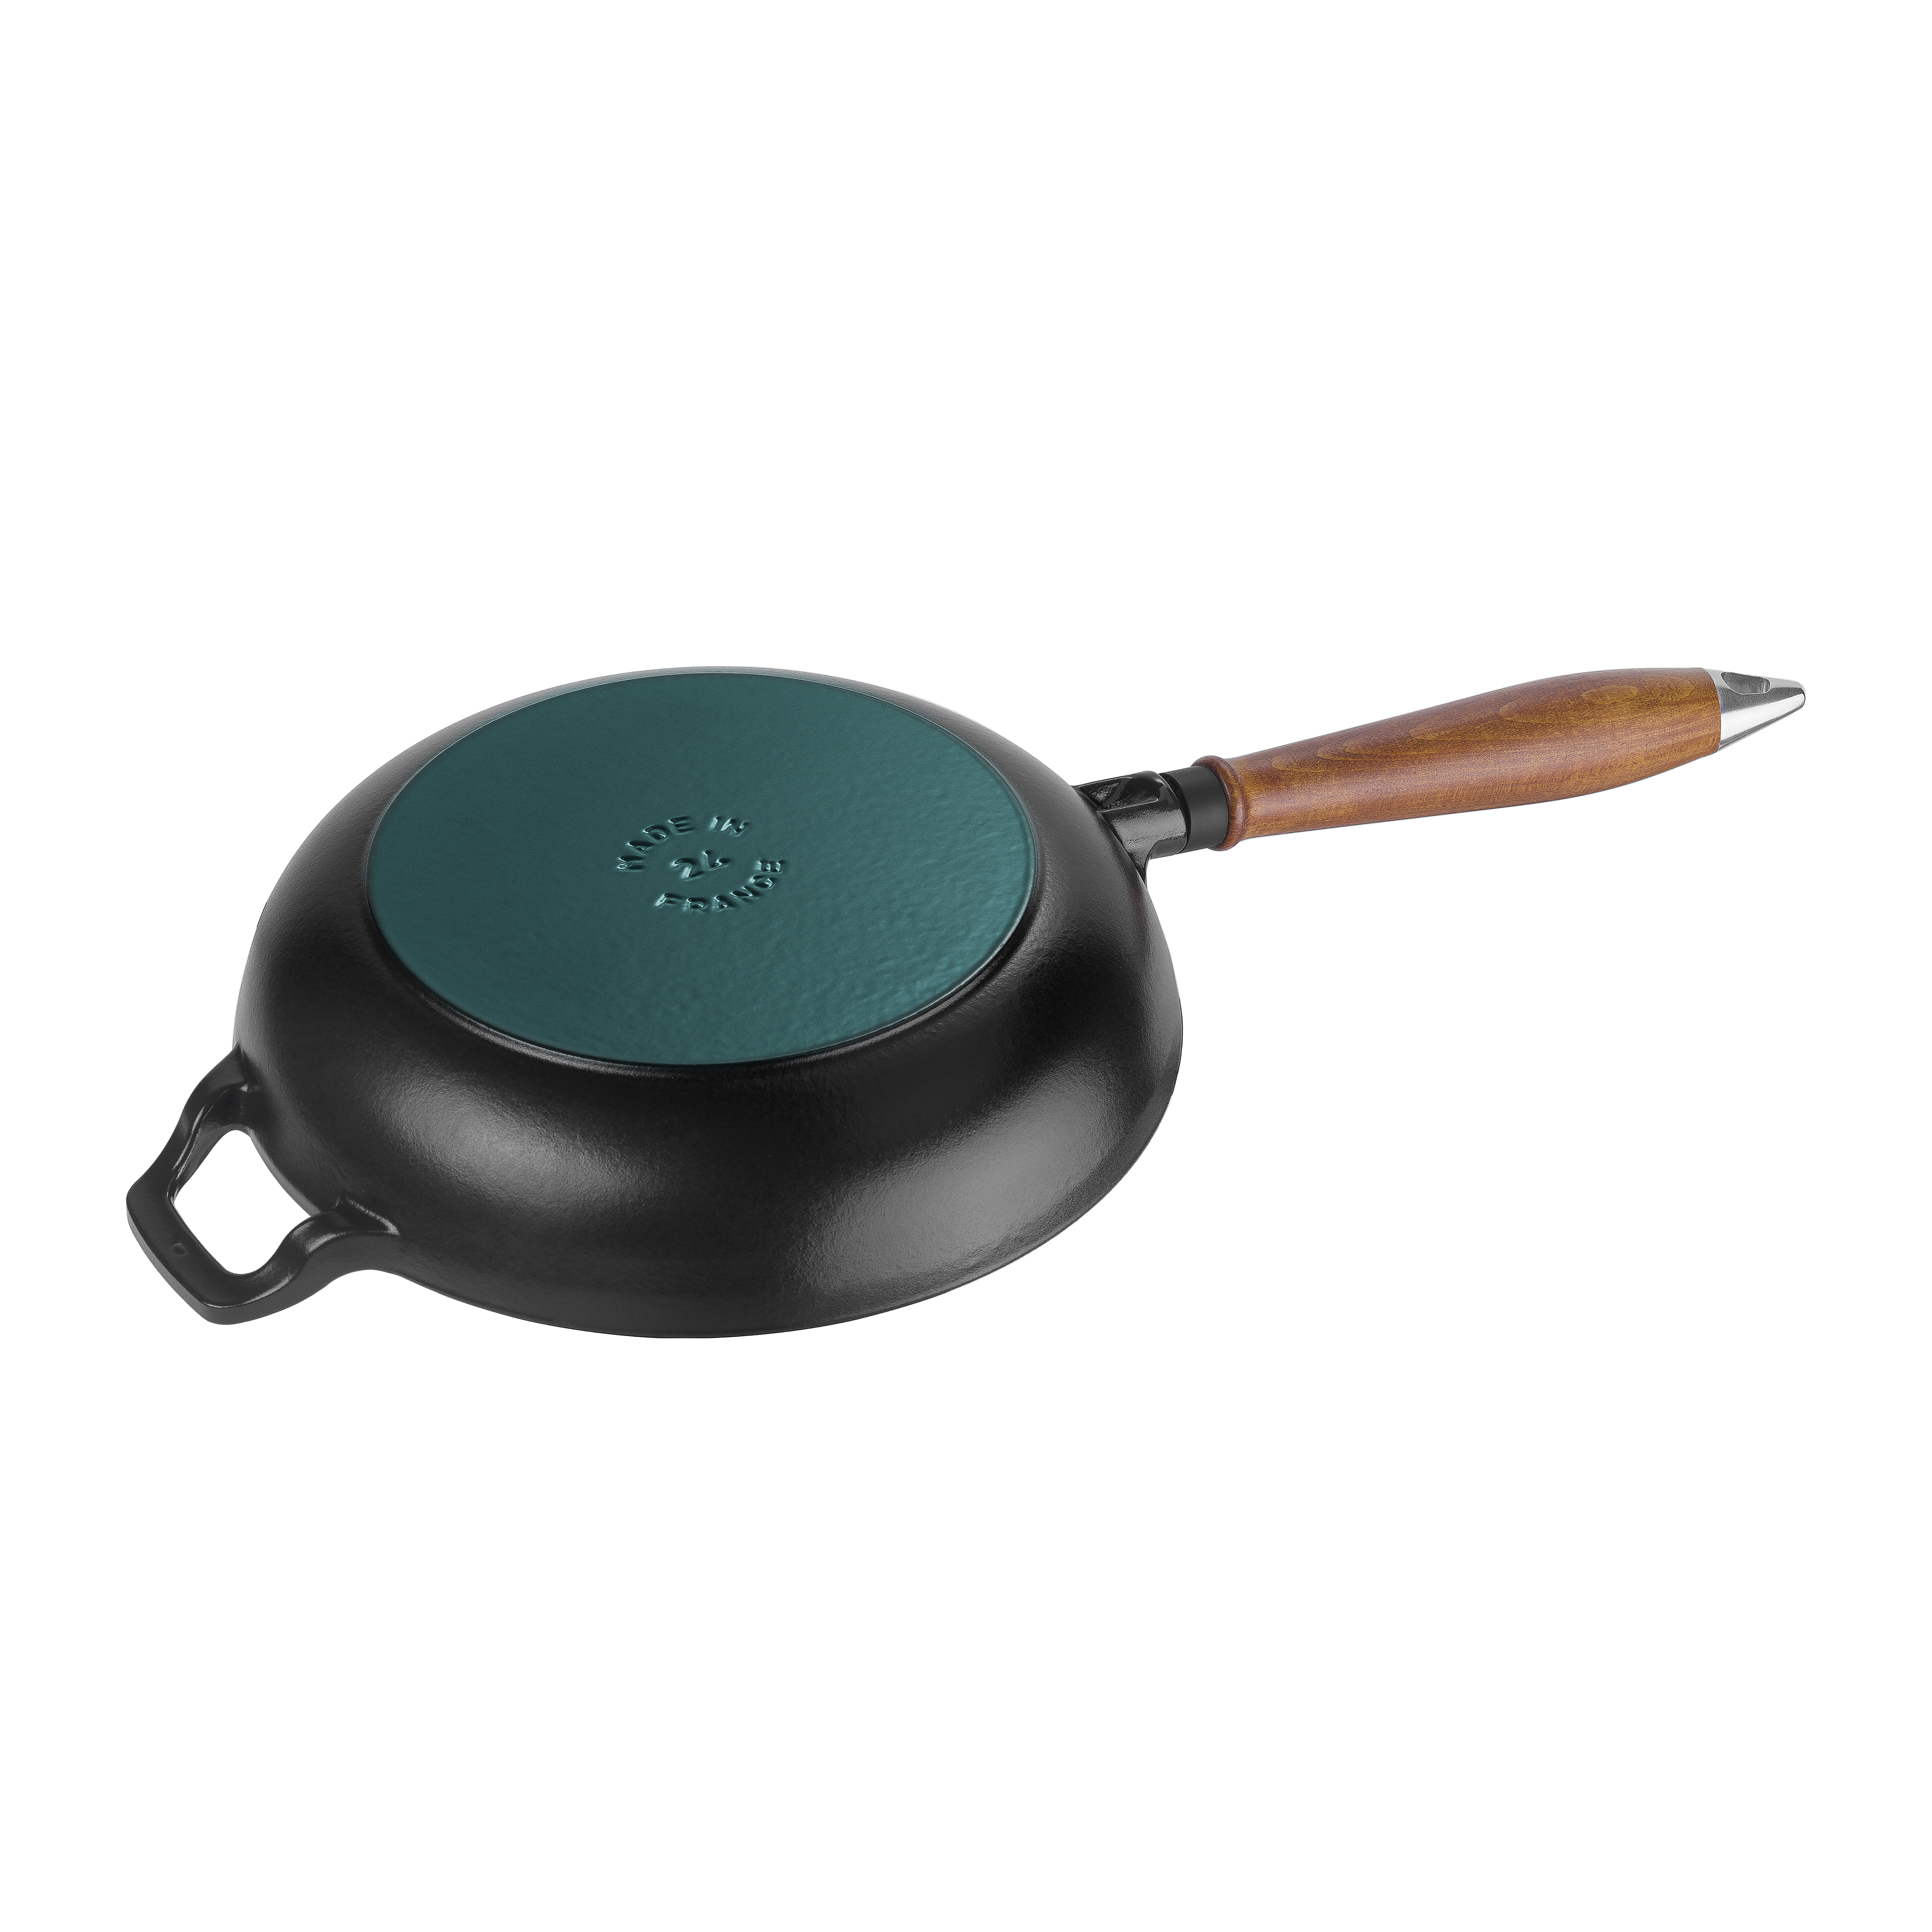 https://www.nordicnest.com/assets/blobs/staub-vintage-frying-pan-with-wooden-handle-24-cm-black/502885-01_2_ProductImageExtra-893b93e102.jpg